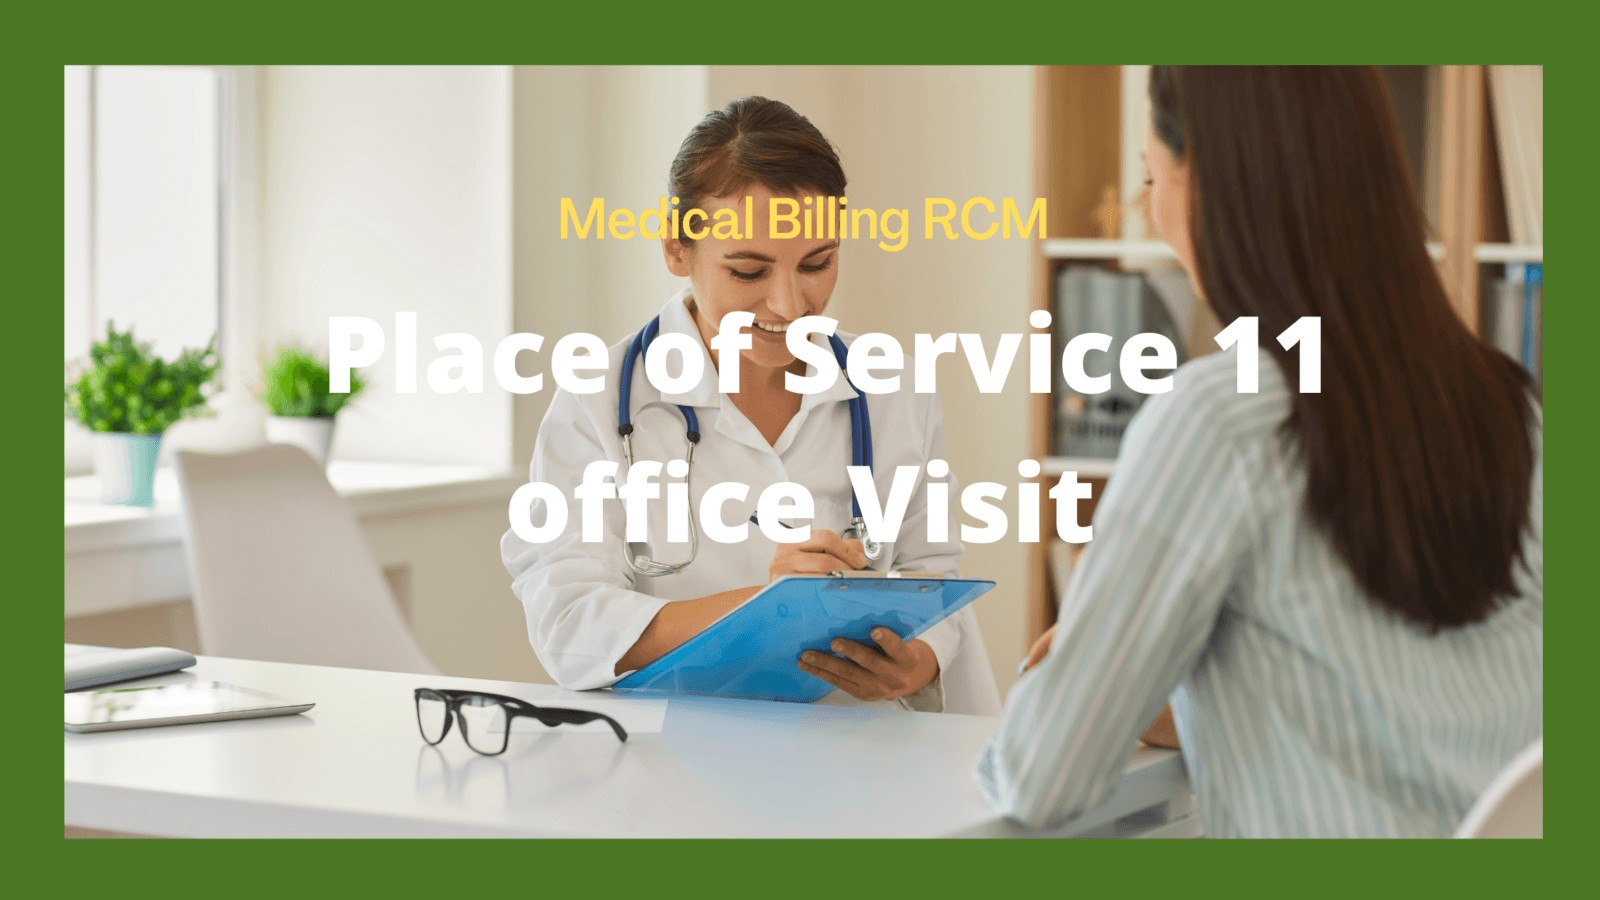 11 place of service for office visit